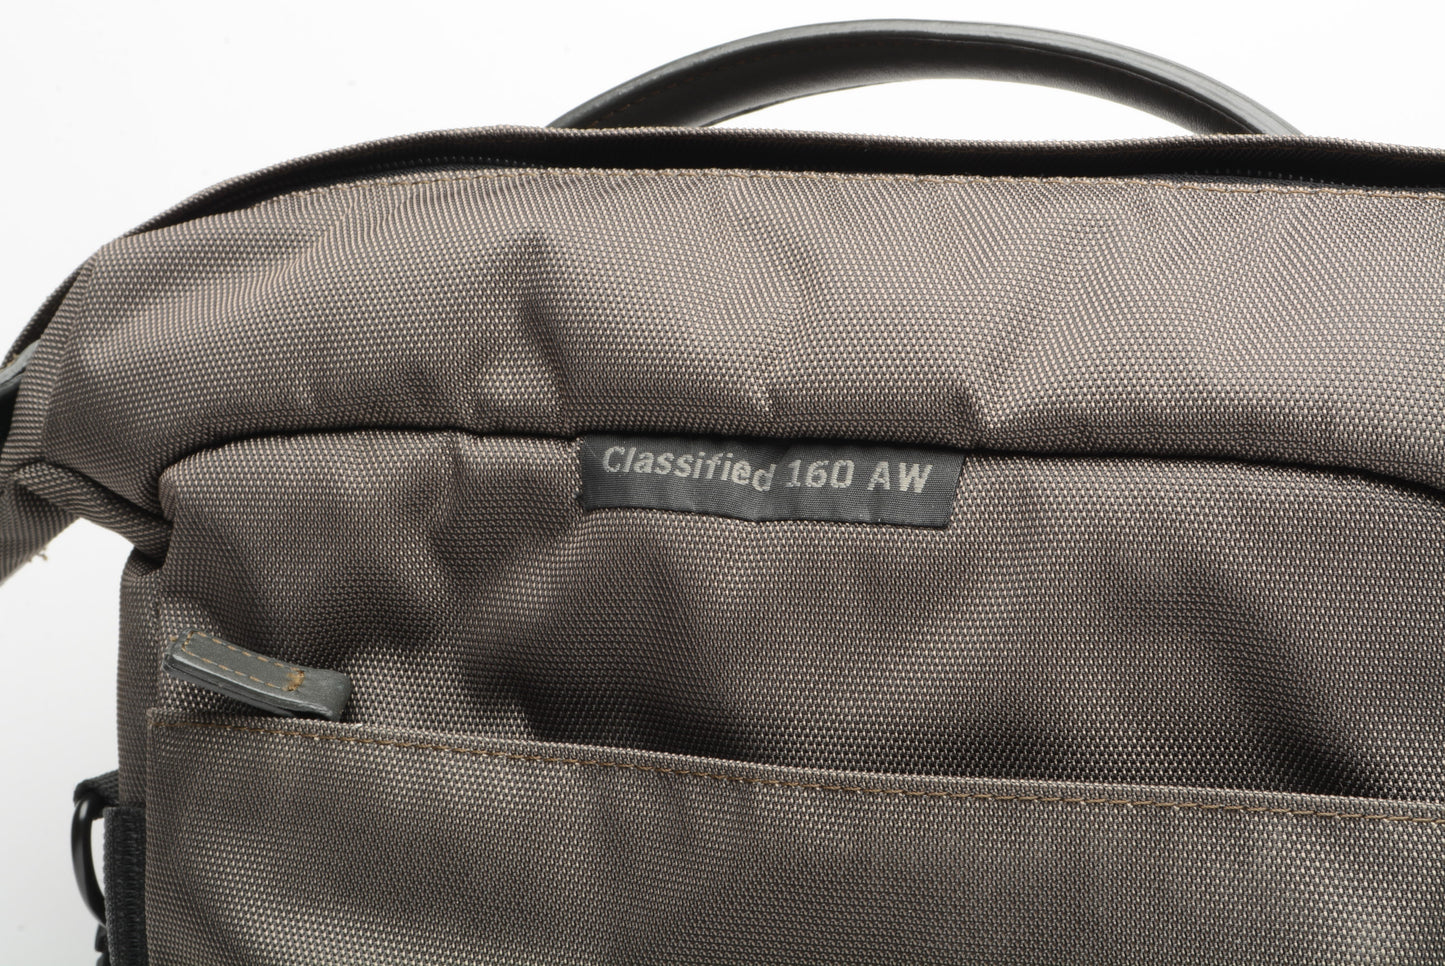 Lowepro Classified 160AW Messenger bag, gently used, great (Sepia color)